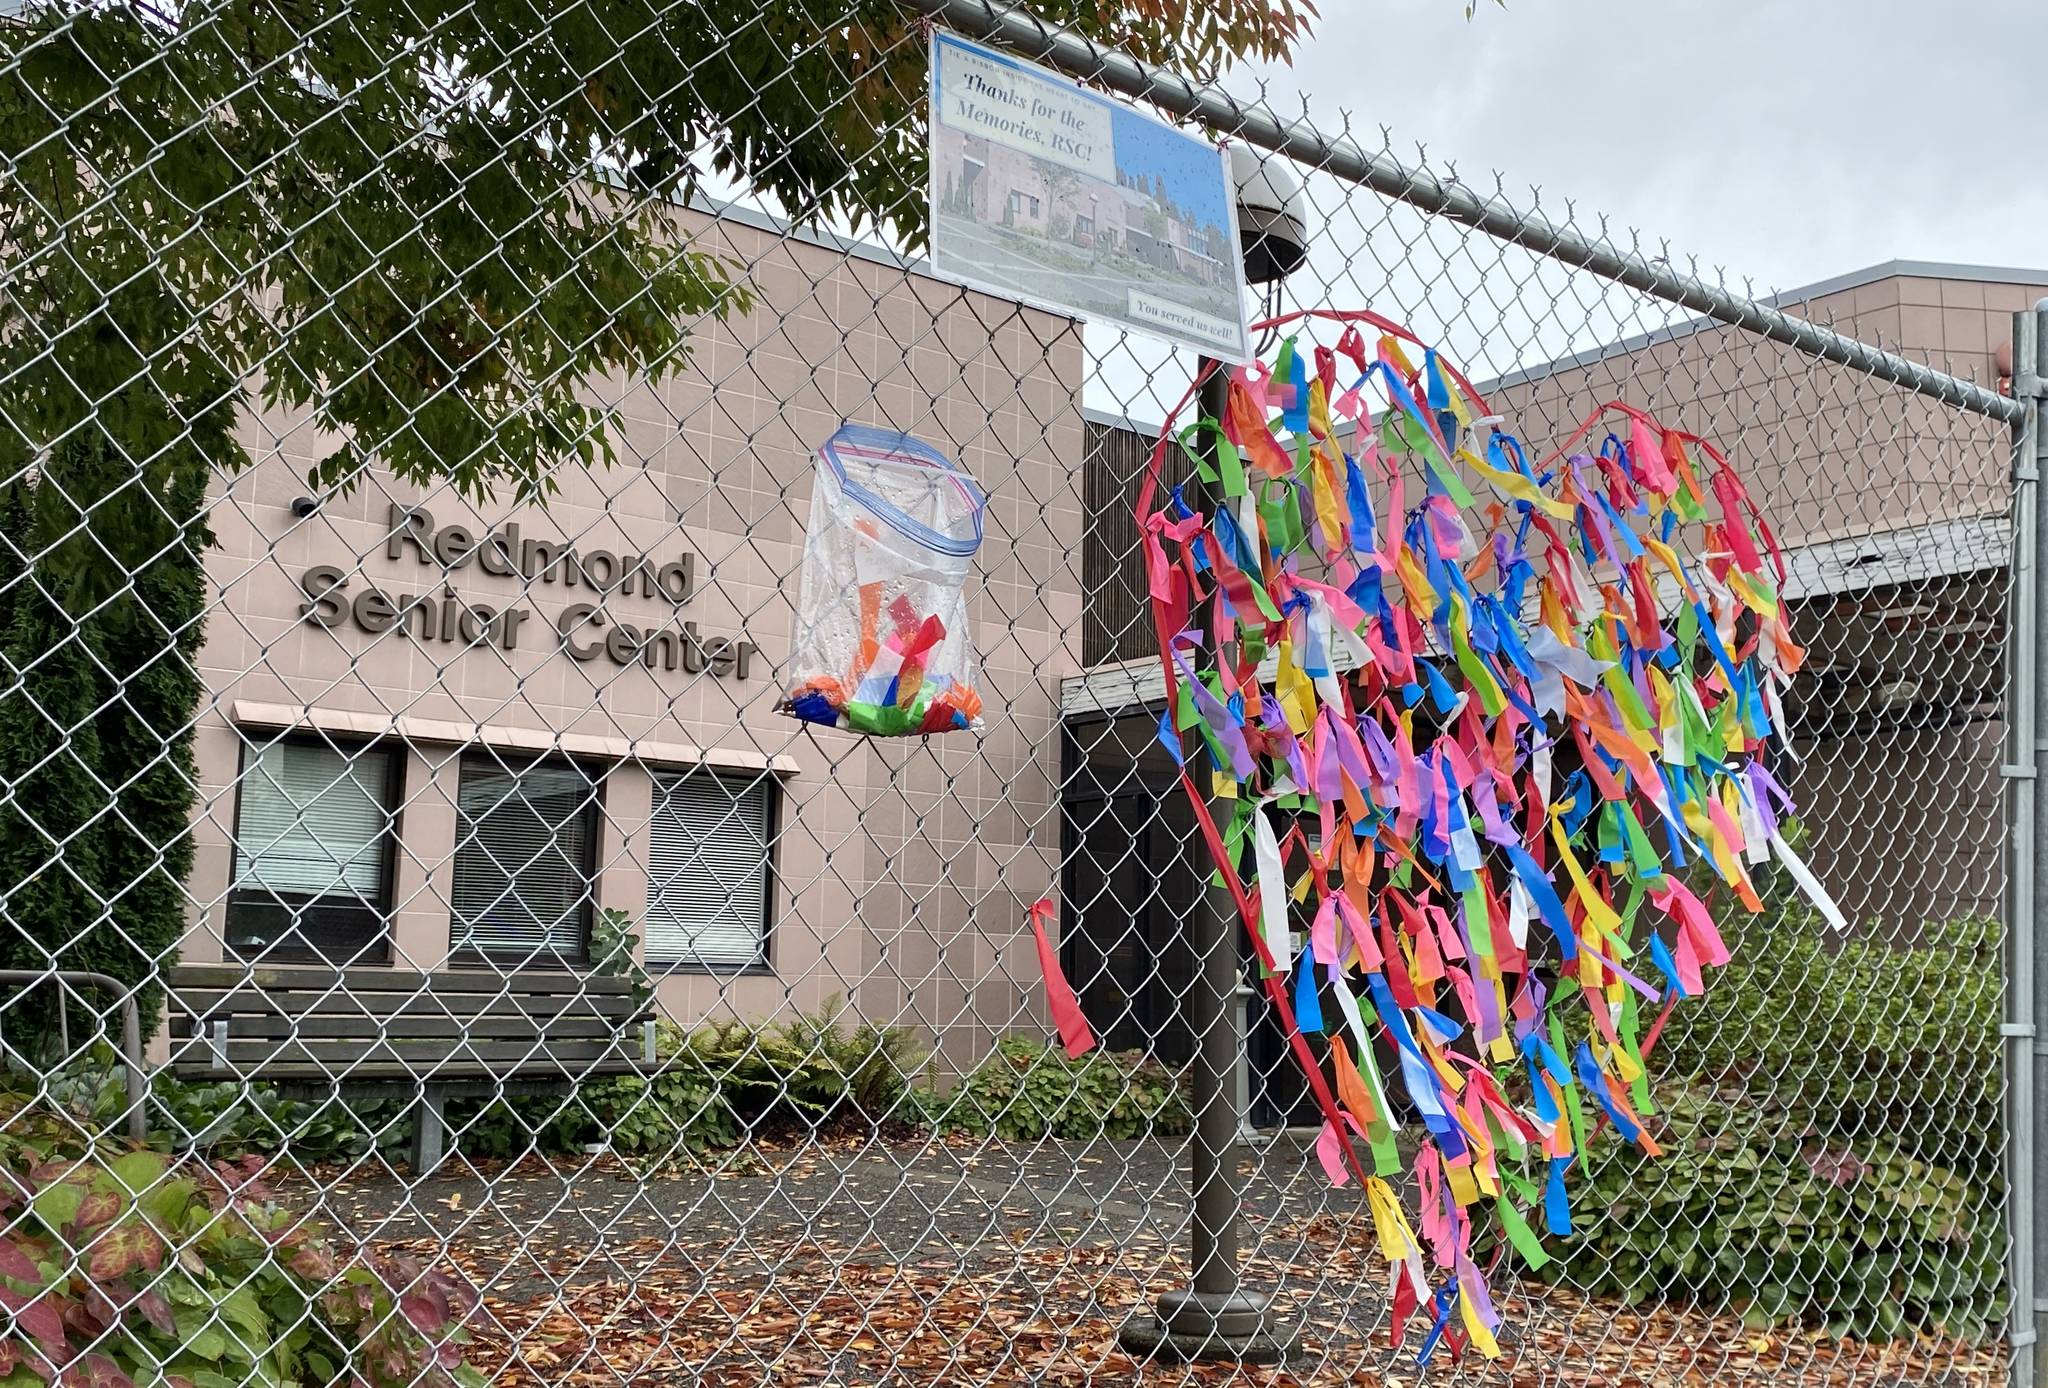 The closed Redmond Senior Center on Oct. 13. Community members leave ribbons in the heart to honor the memories of the to-be-demolished center. Haley Ausbun/staff photo.